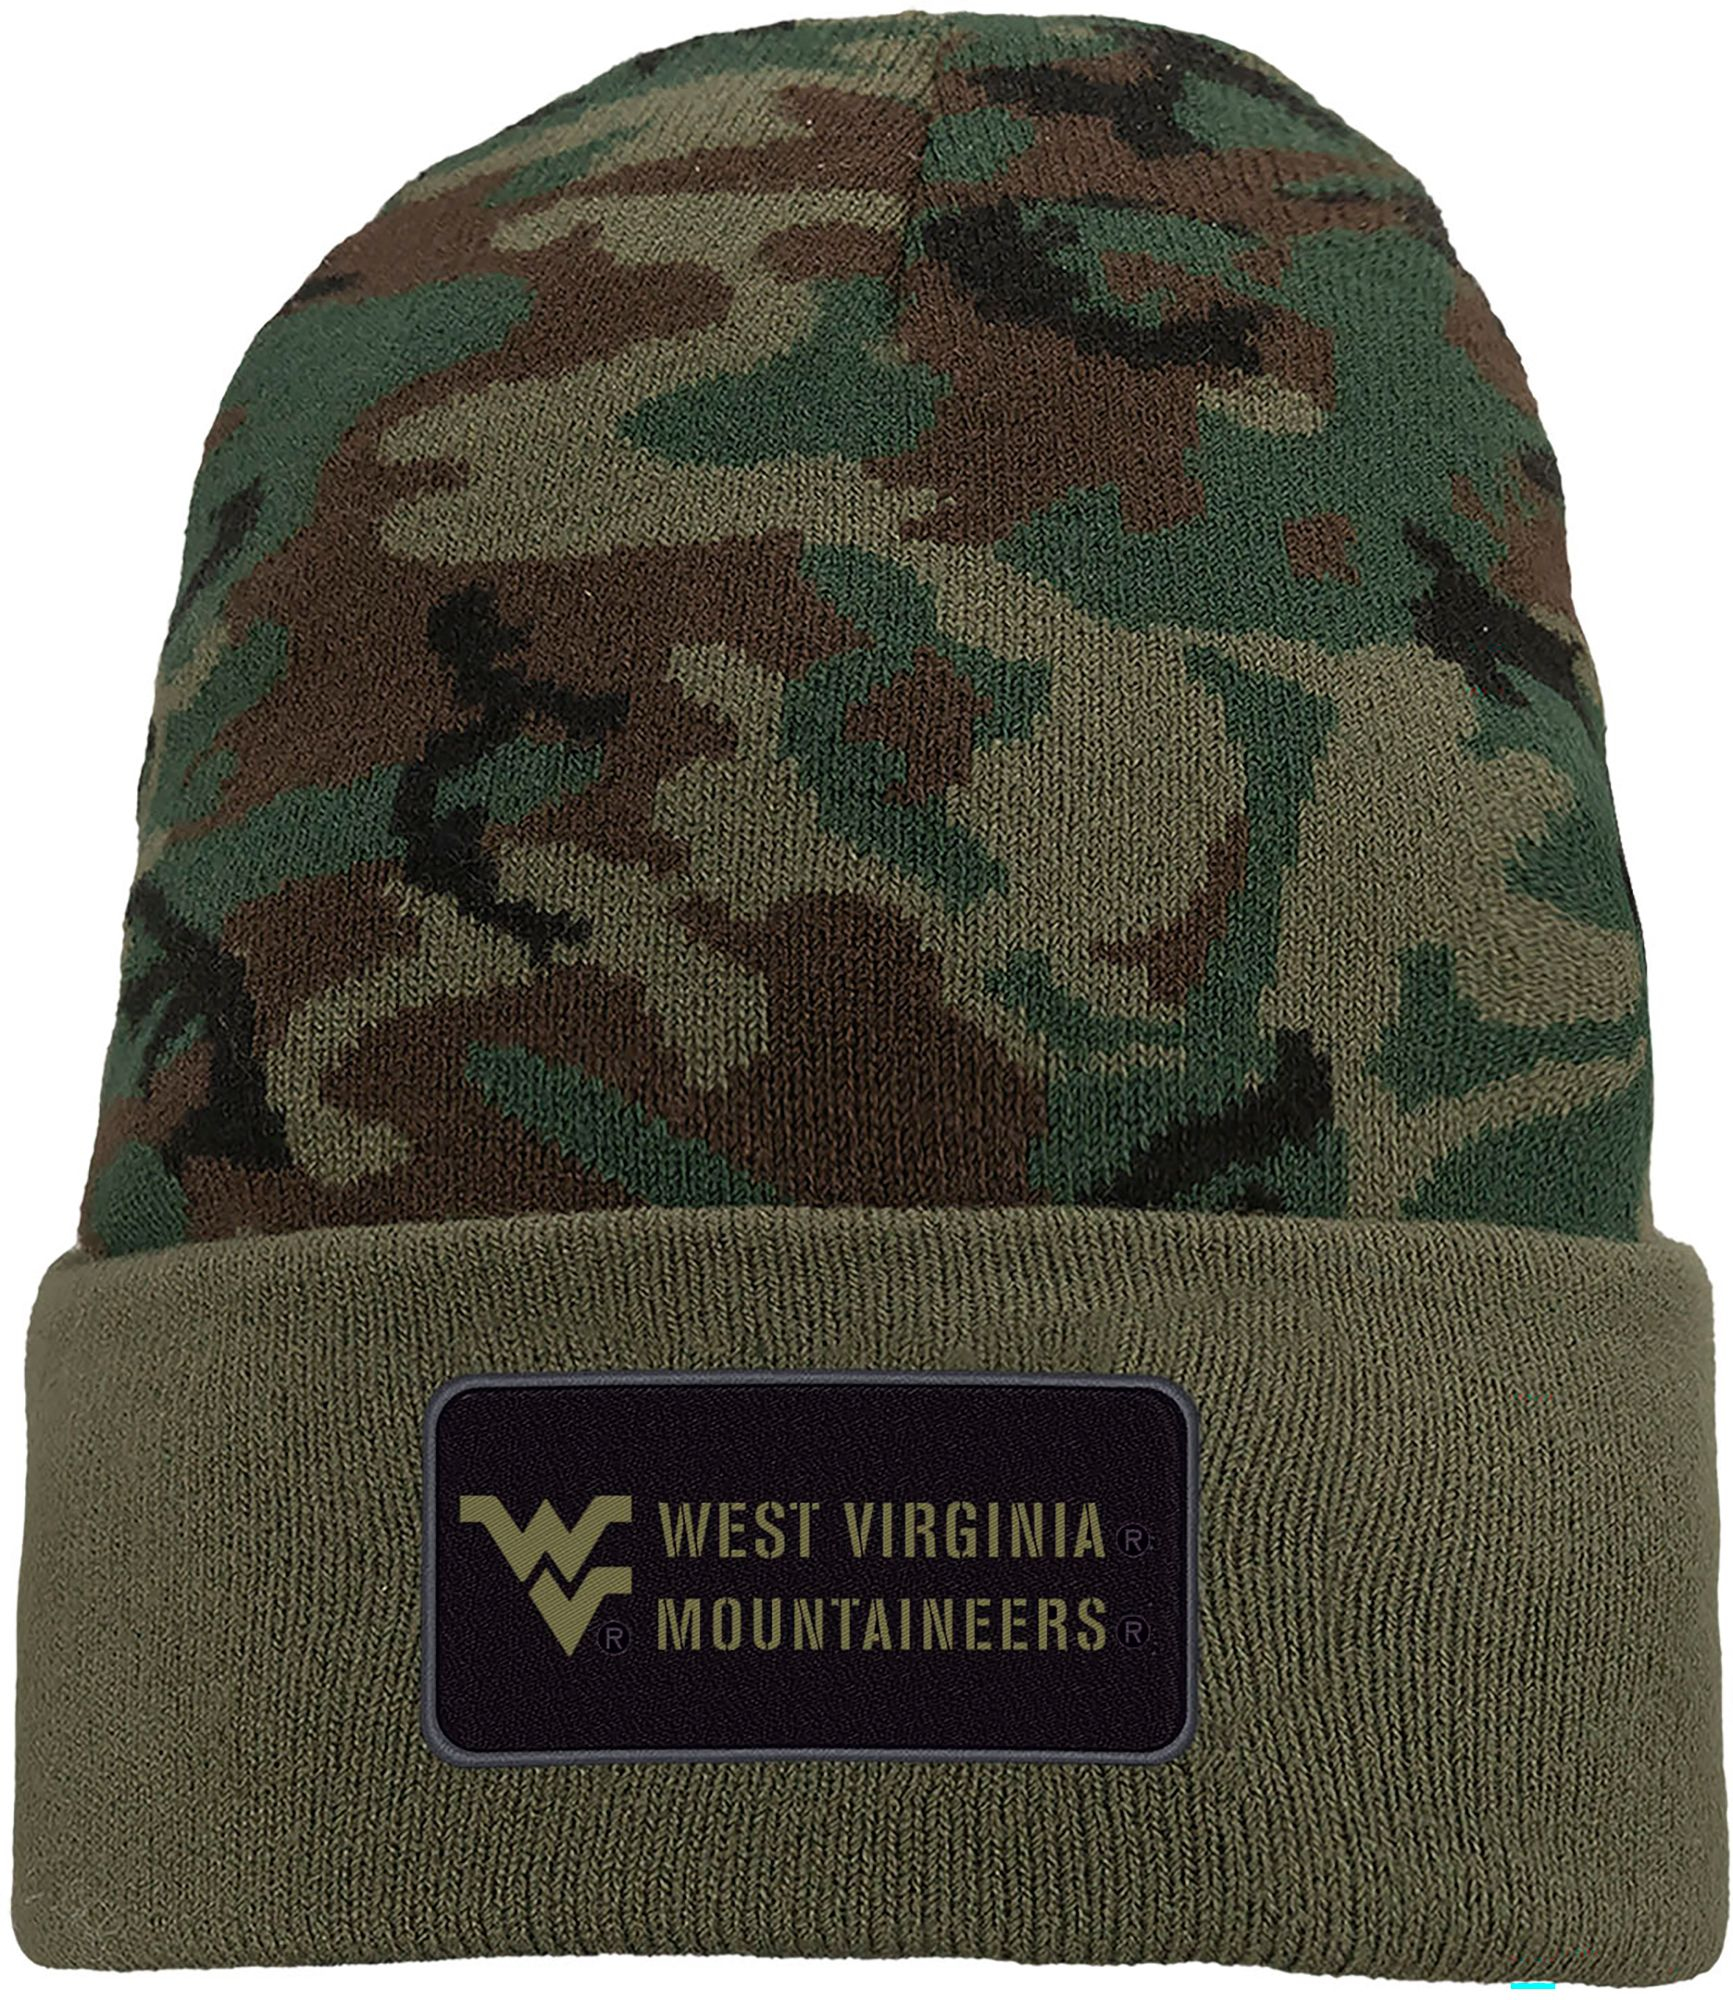 Nike Men's West Virginia Mountaineers Camo Military Knit Hat, Green | Holiday Gift